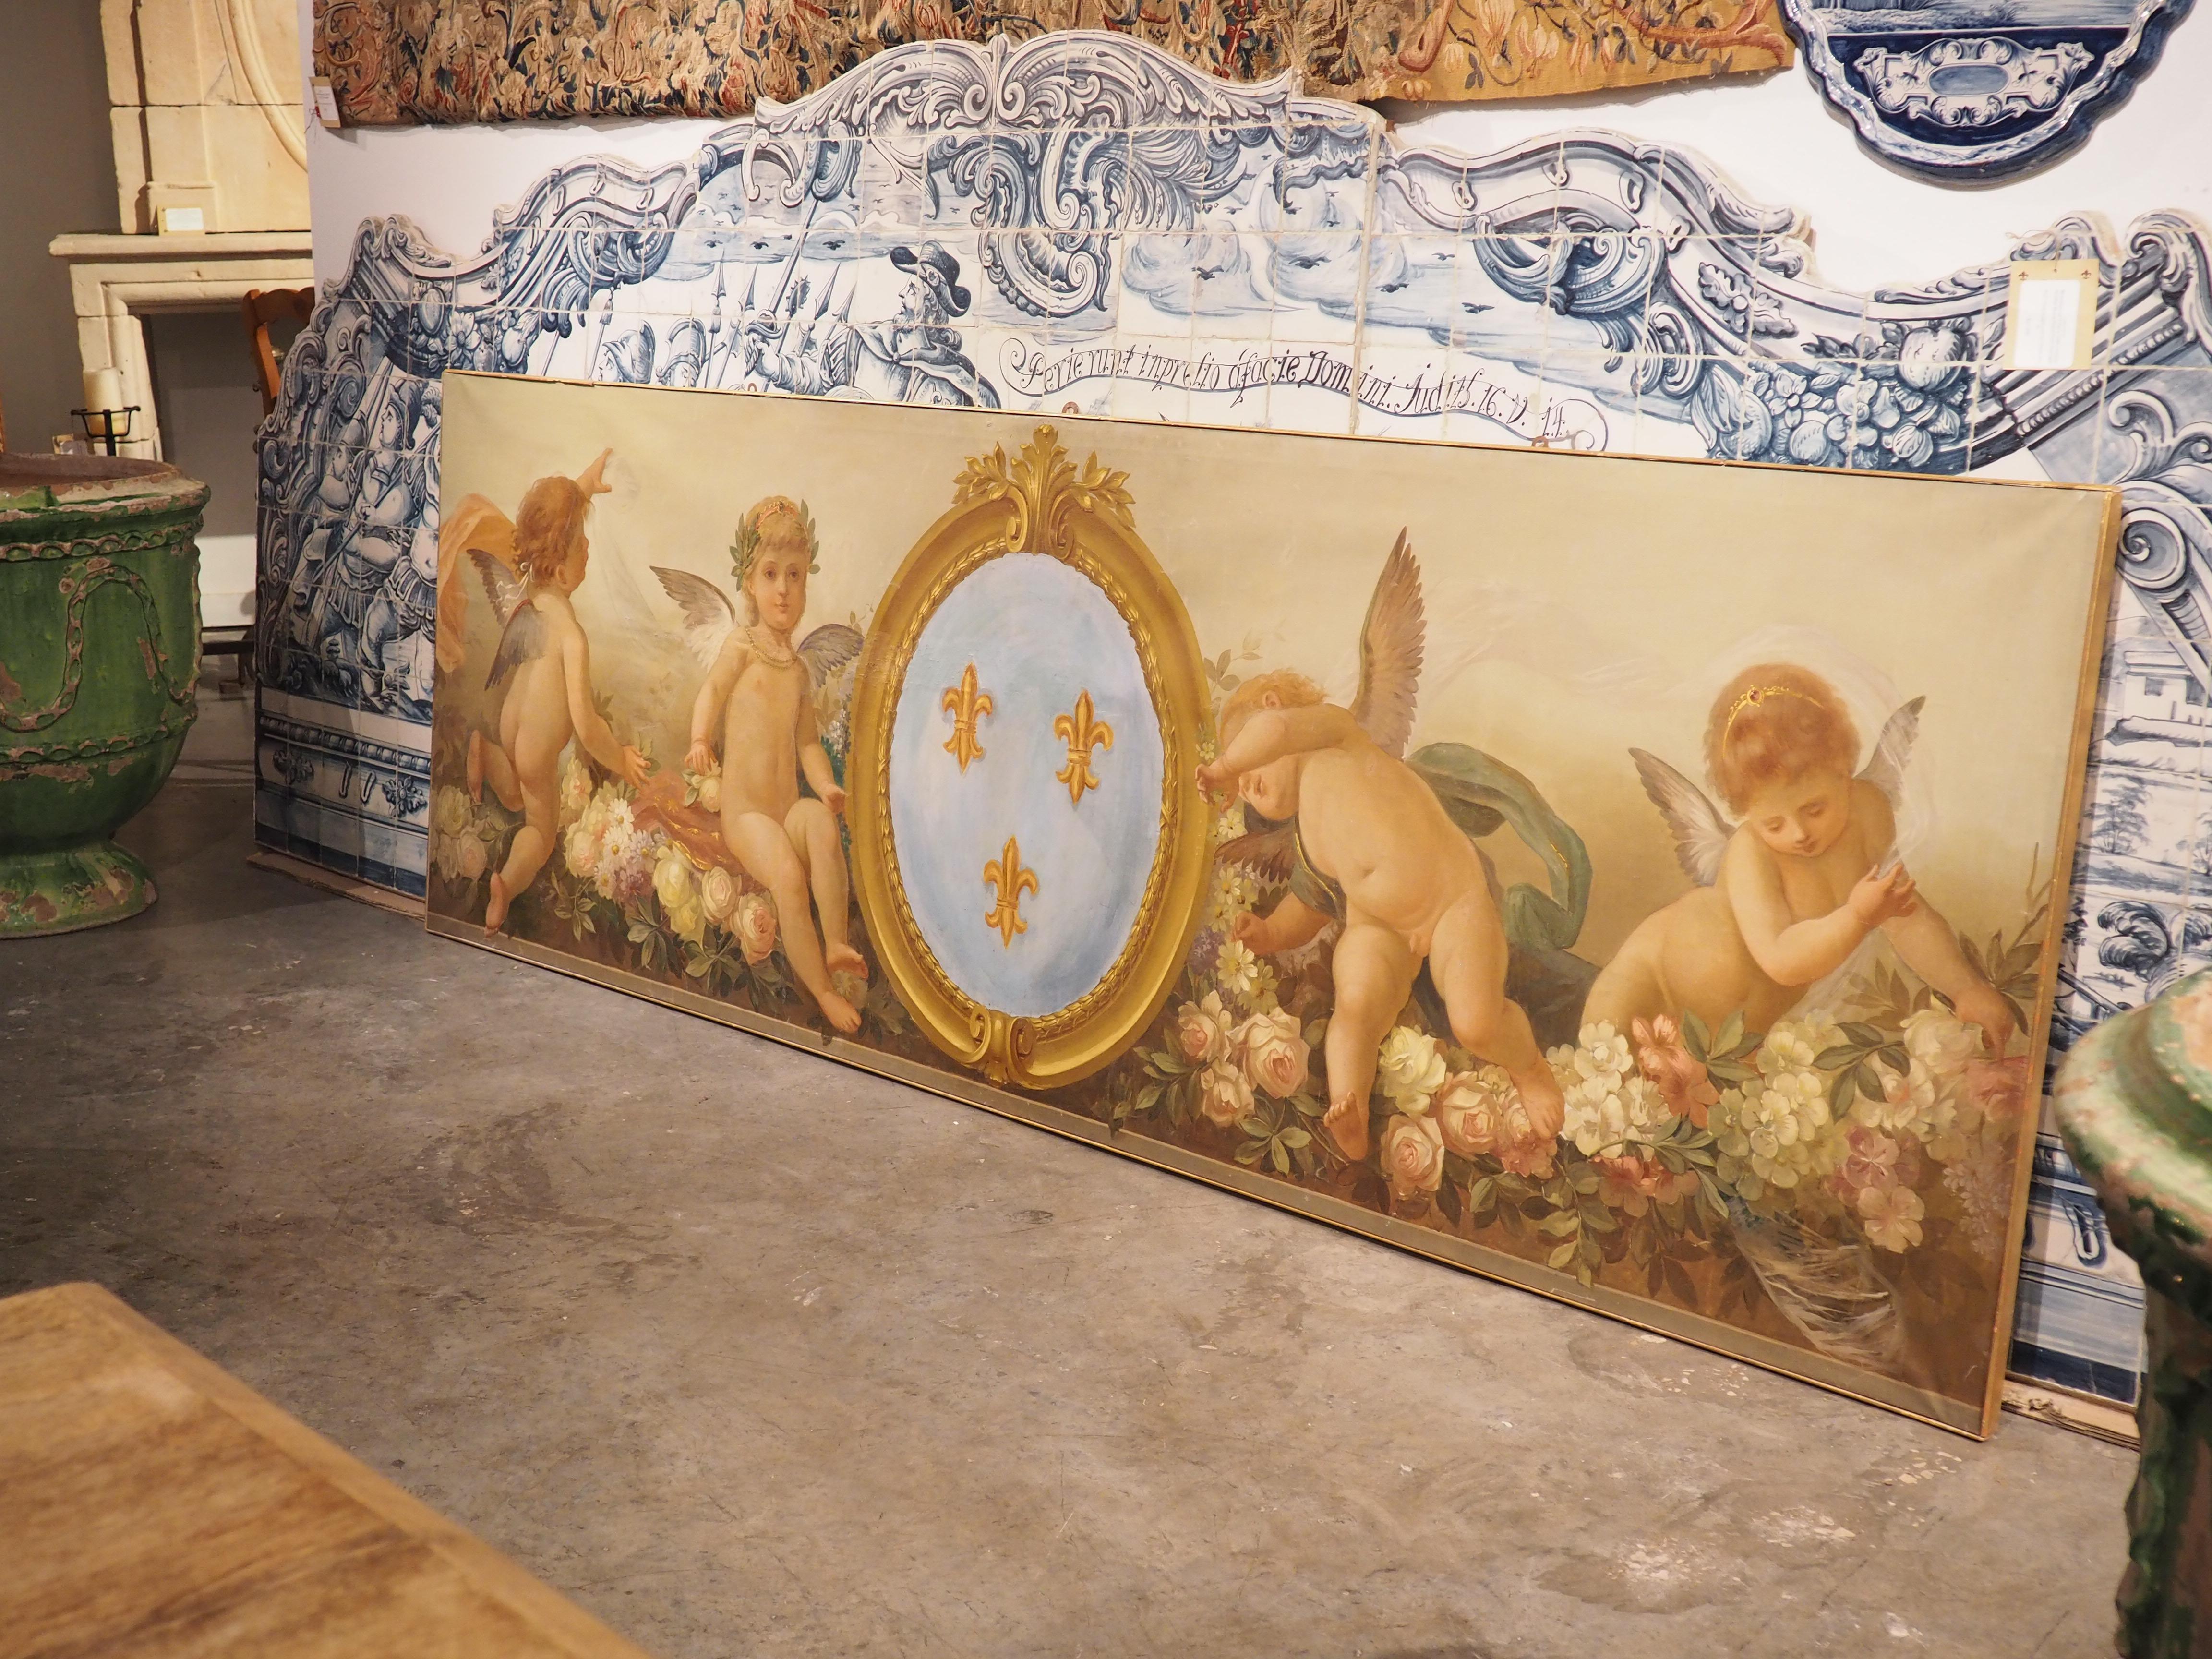 This beautiful boiserie panel depicting an allegory of Spring and the Arms of France was hand-painted in France, circa 1840. Boiserie is ornate wooden paneling that covered walls and ceilings of luxurious chateaus in France. The use of these panels